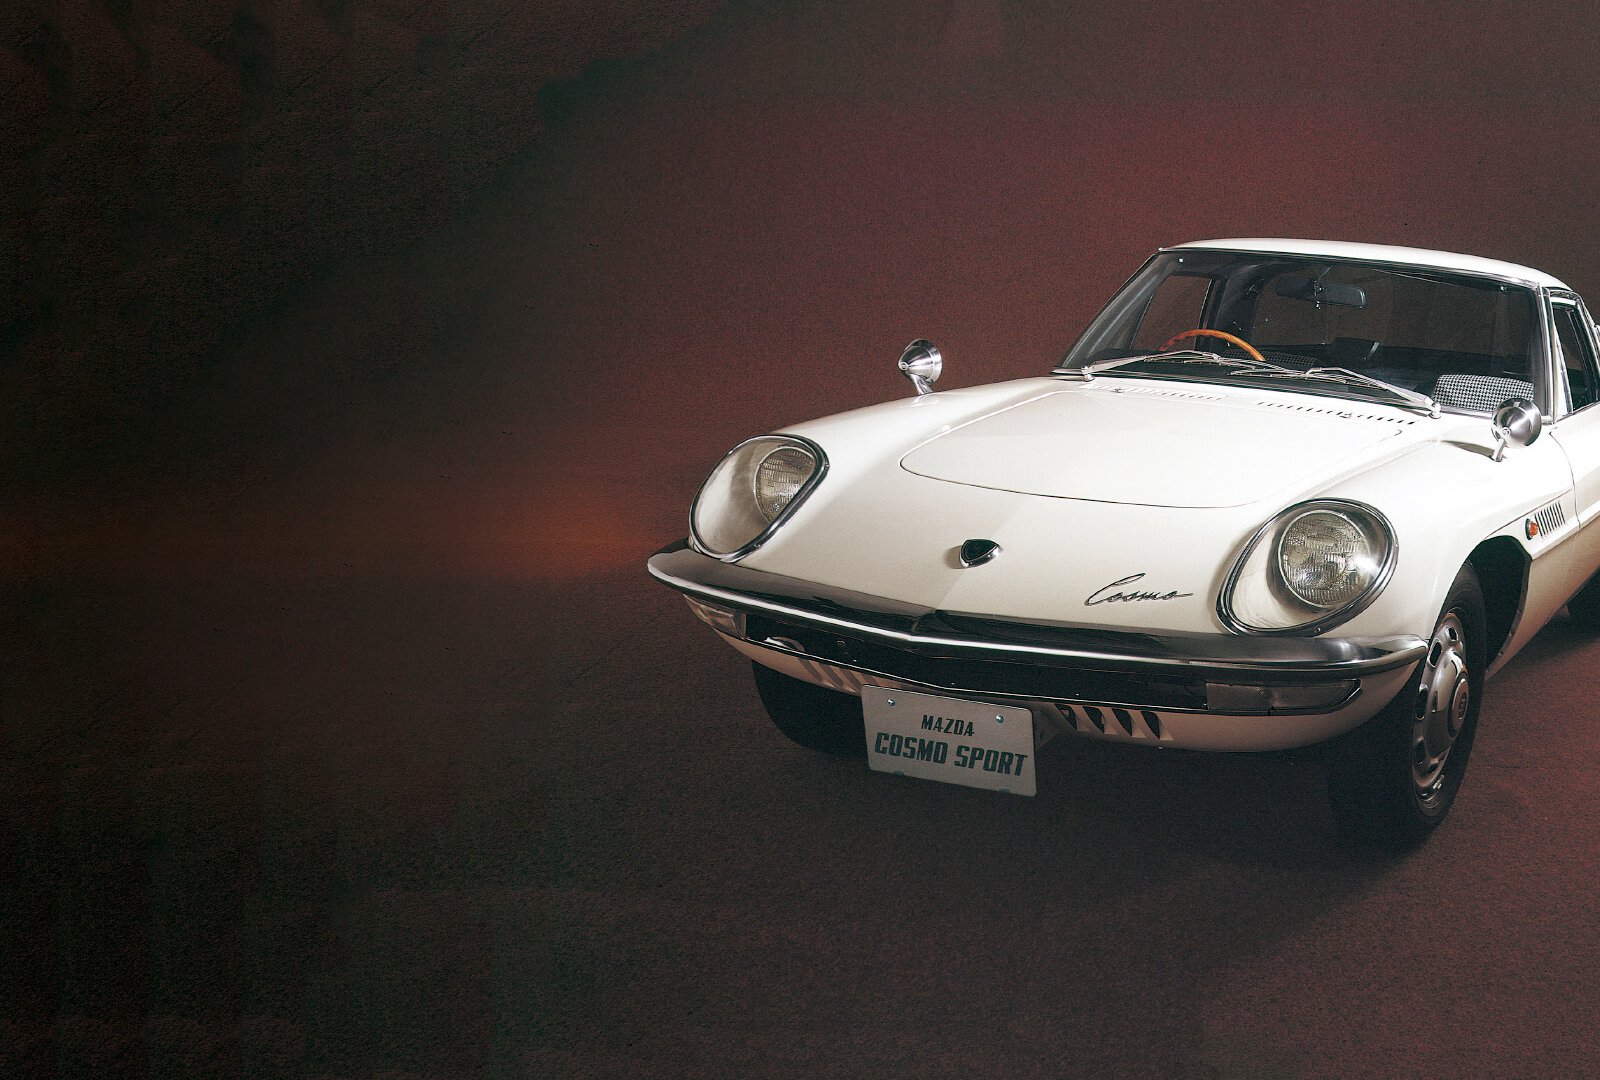 White Mazda Cosmo Sport viewed from in front of driver headlight